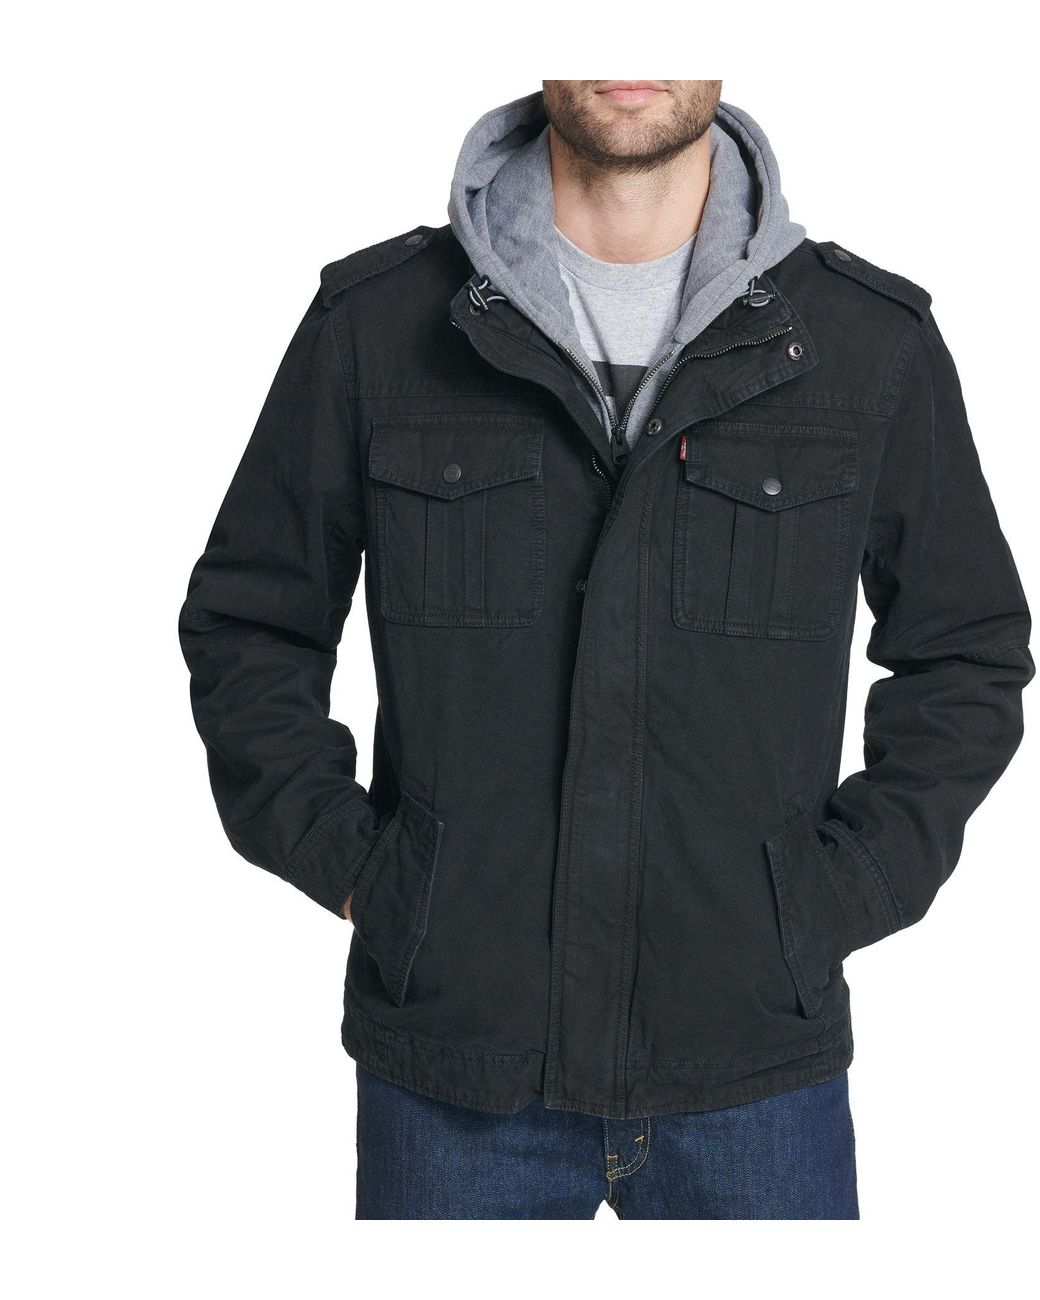 Levi's Sherpa Lined Hooded Utility Jacket in Black for Men - Lyst